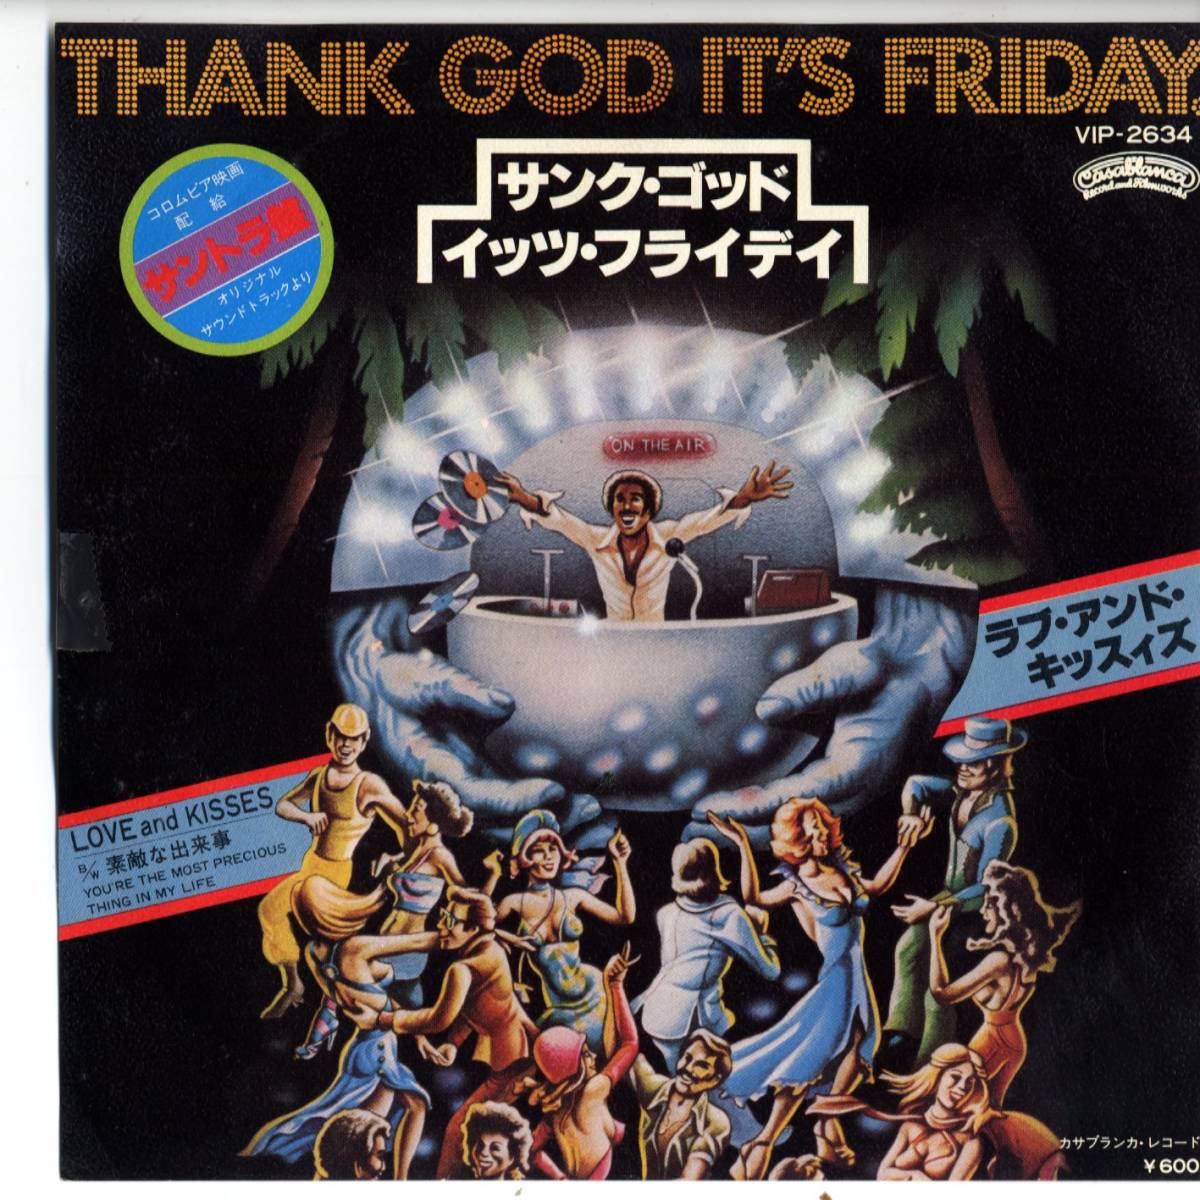 Love And Kisses 「Thank God It's Friday/ You're The Most Precious Thing In My Life」国内盤EPレコード　サントラ盤_画像1